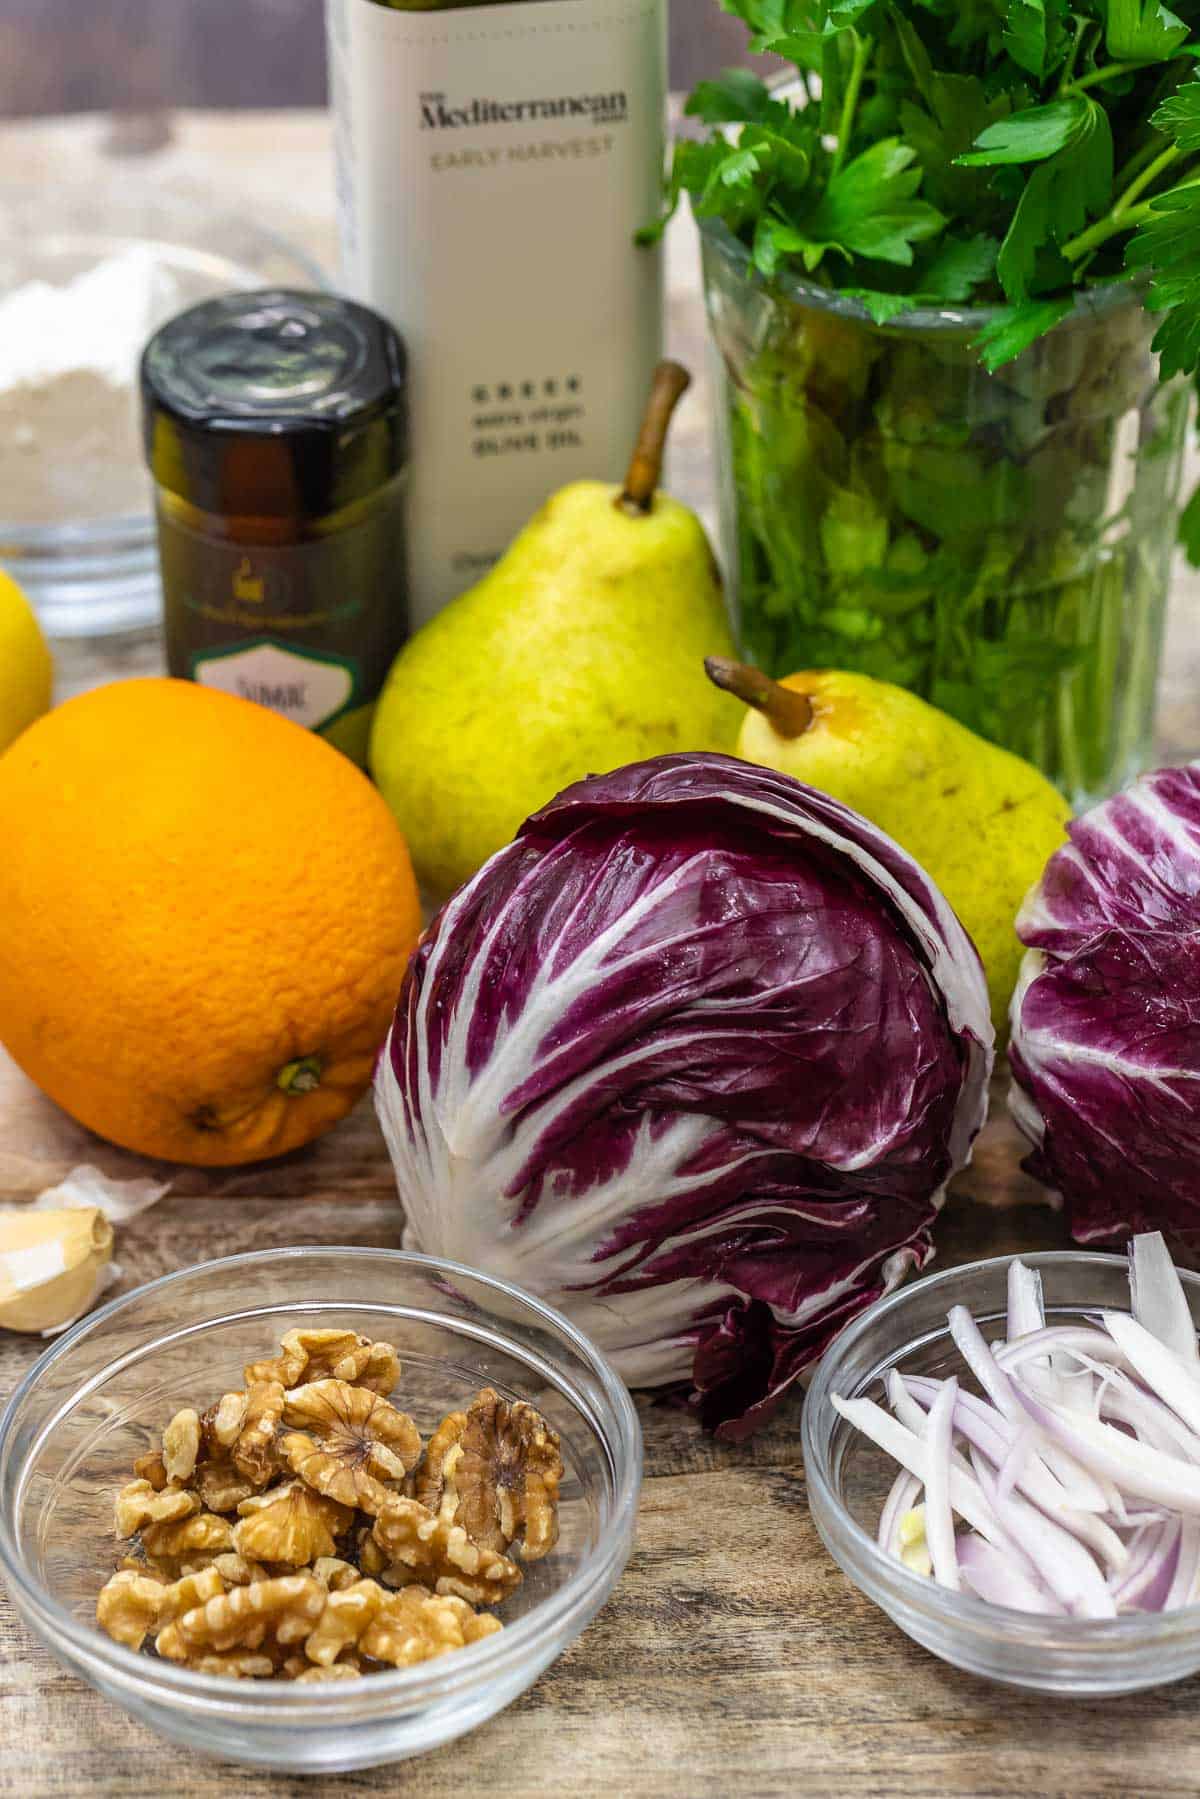 ingredients for radicchio salad including radicchio, oranges, pears, walnuts, shallots, parsley, olive oil and sumac.